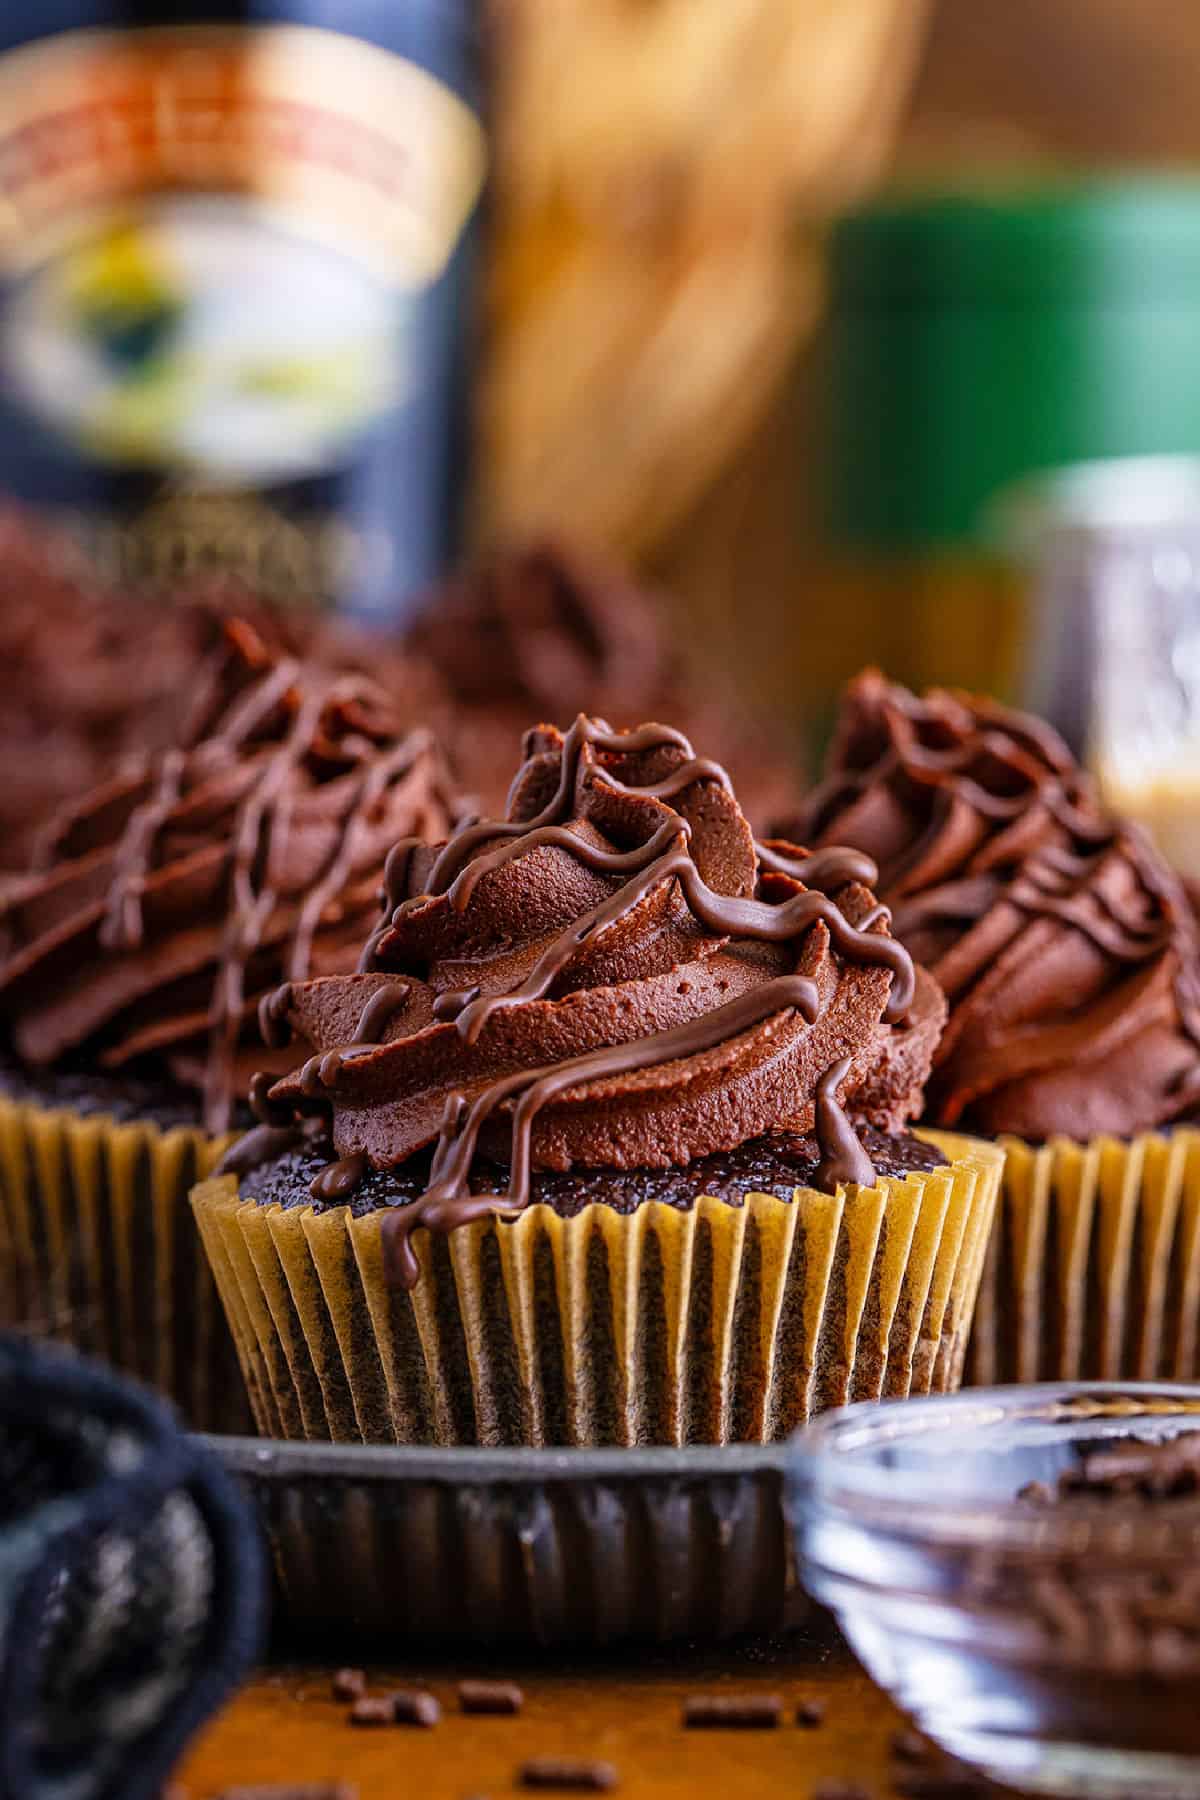 Chocolate cupcakes with swirls of Baileys frosting and chocolate chips on top.